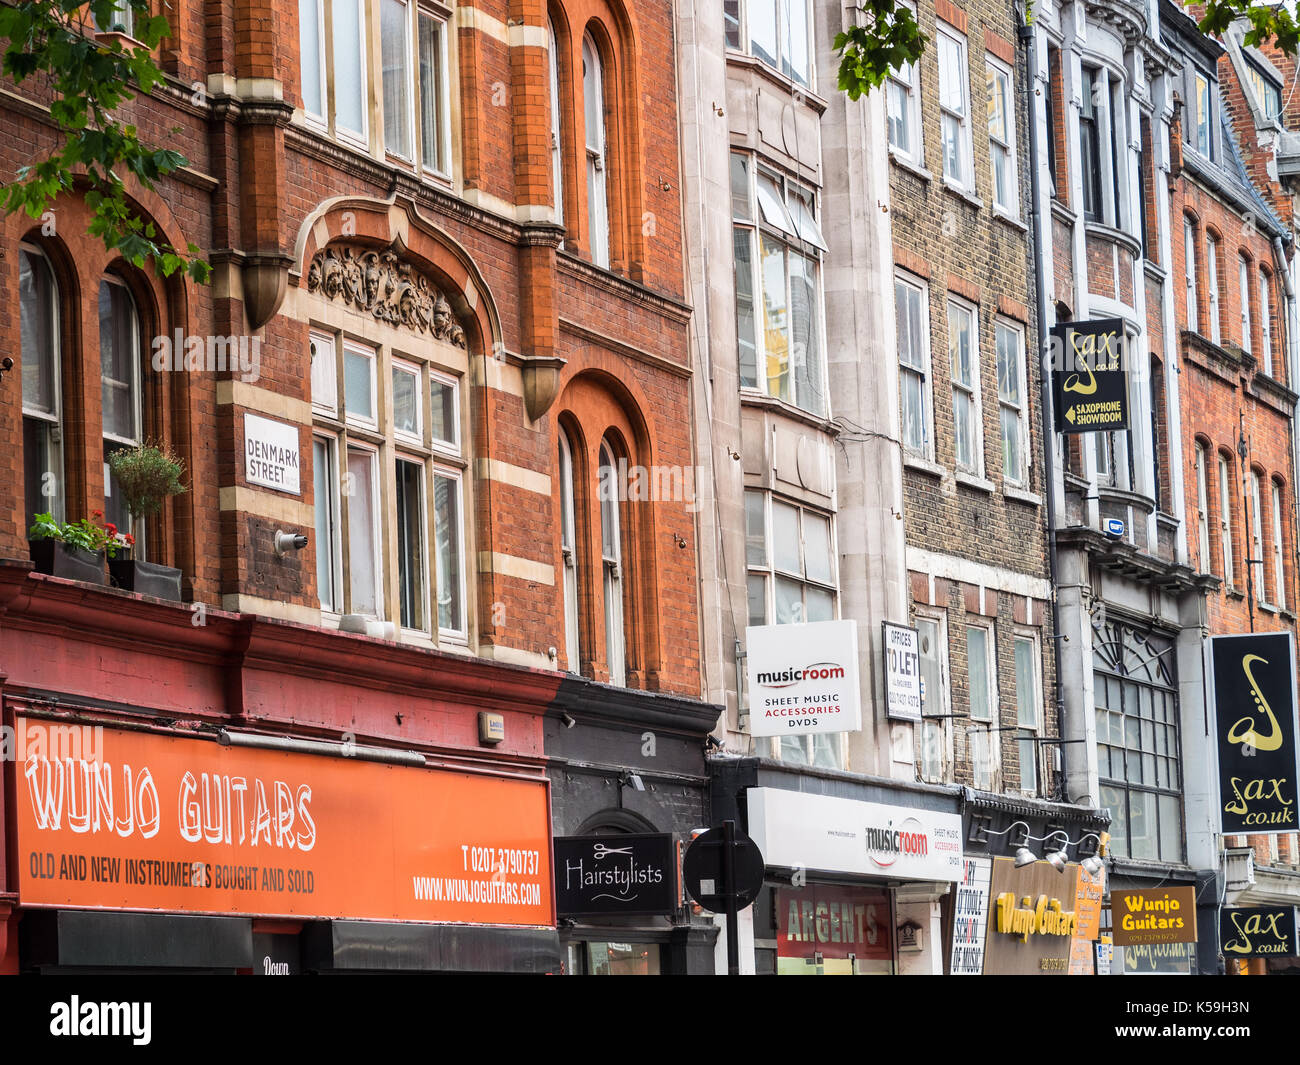 Denmark Street Soho London - part view of London's famous Denmark Street, home to numerous Musical Instrument and Music shops Stock Photo